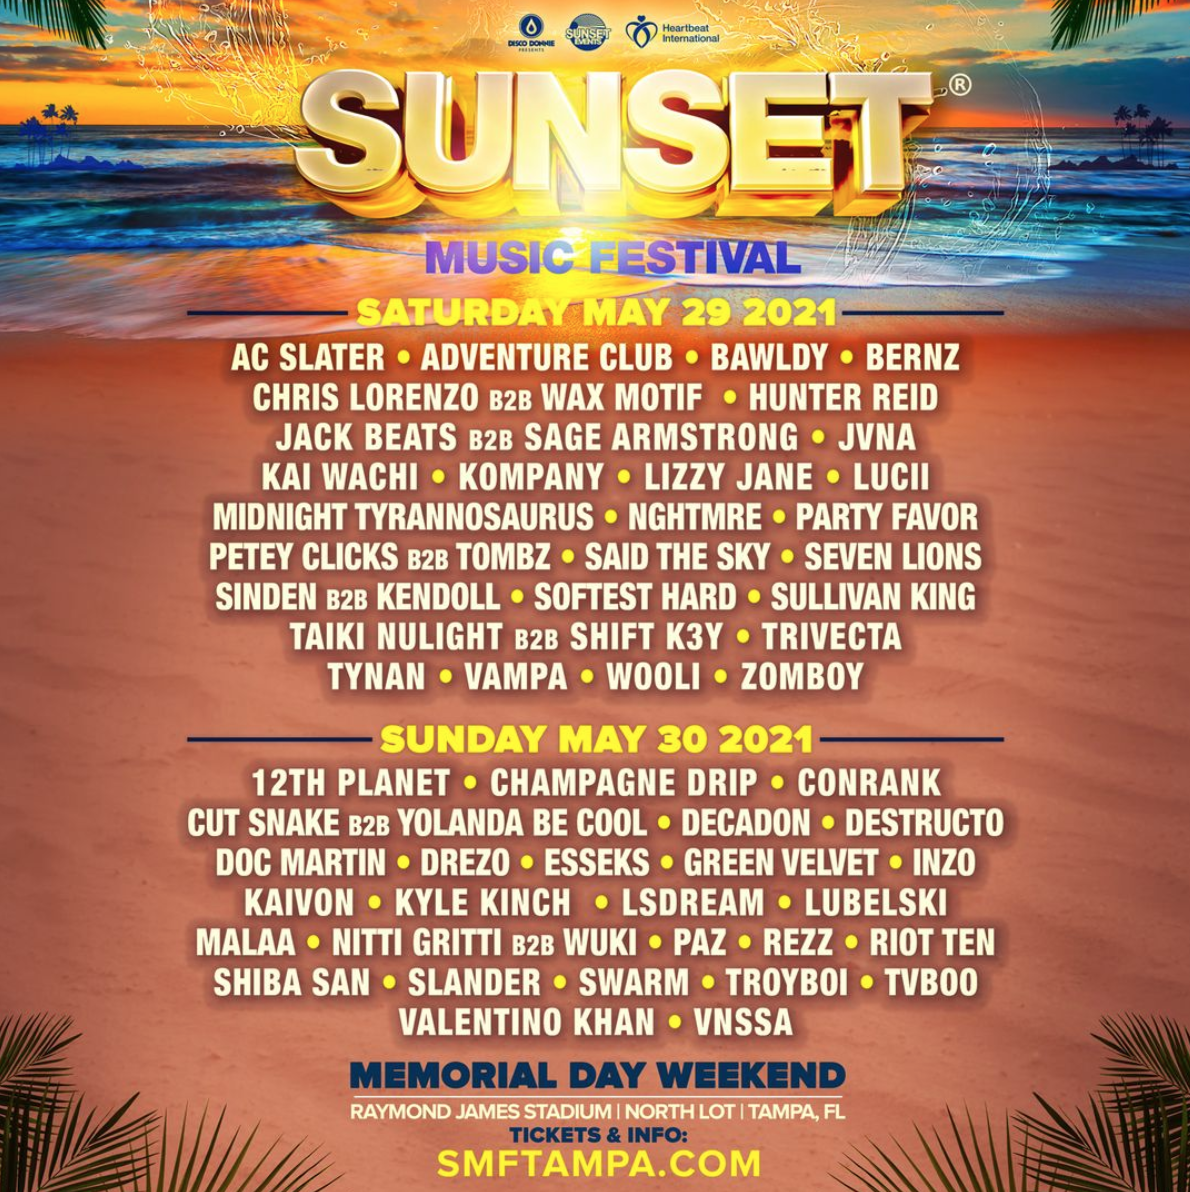 Tampa’s Sunset Music Festival is BACK!